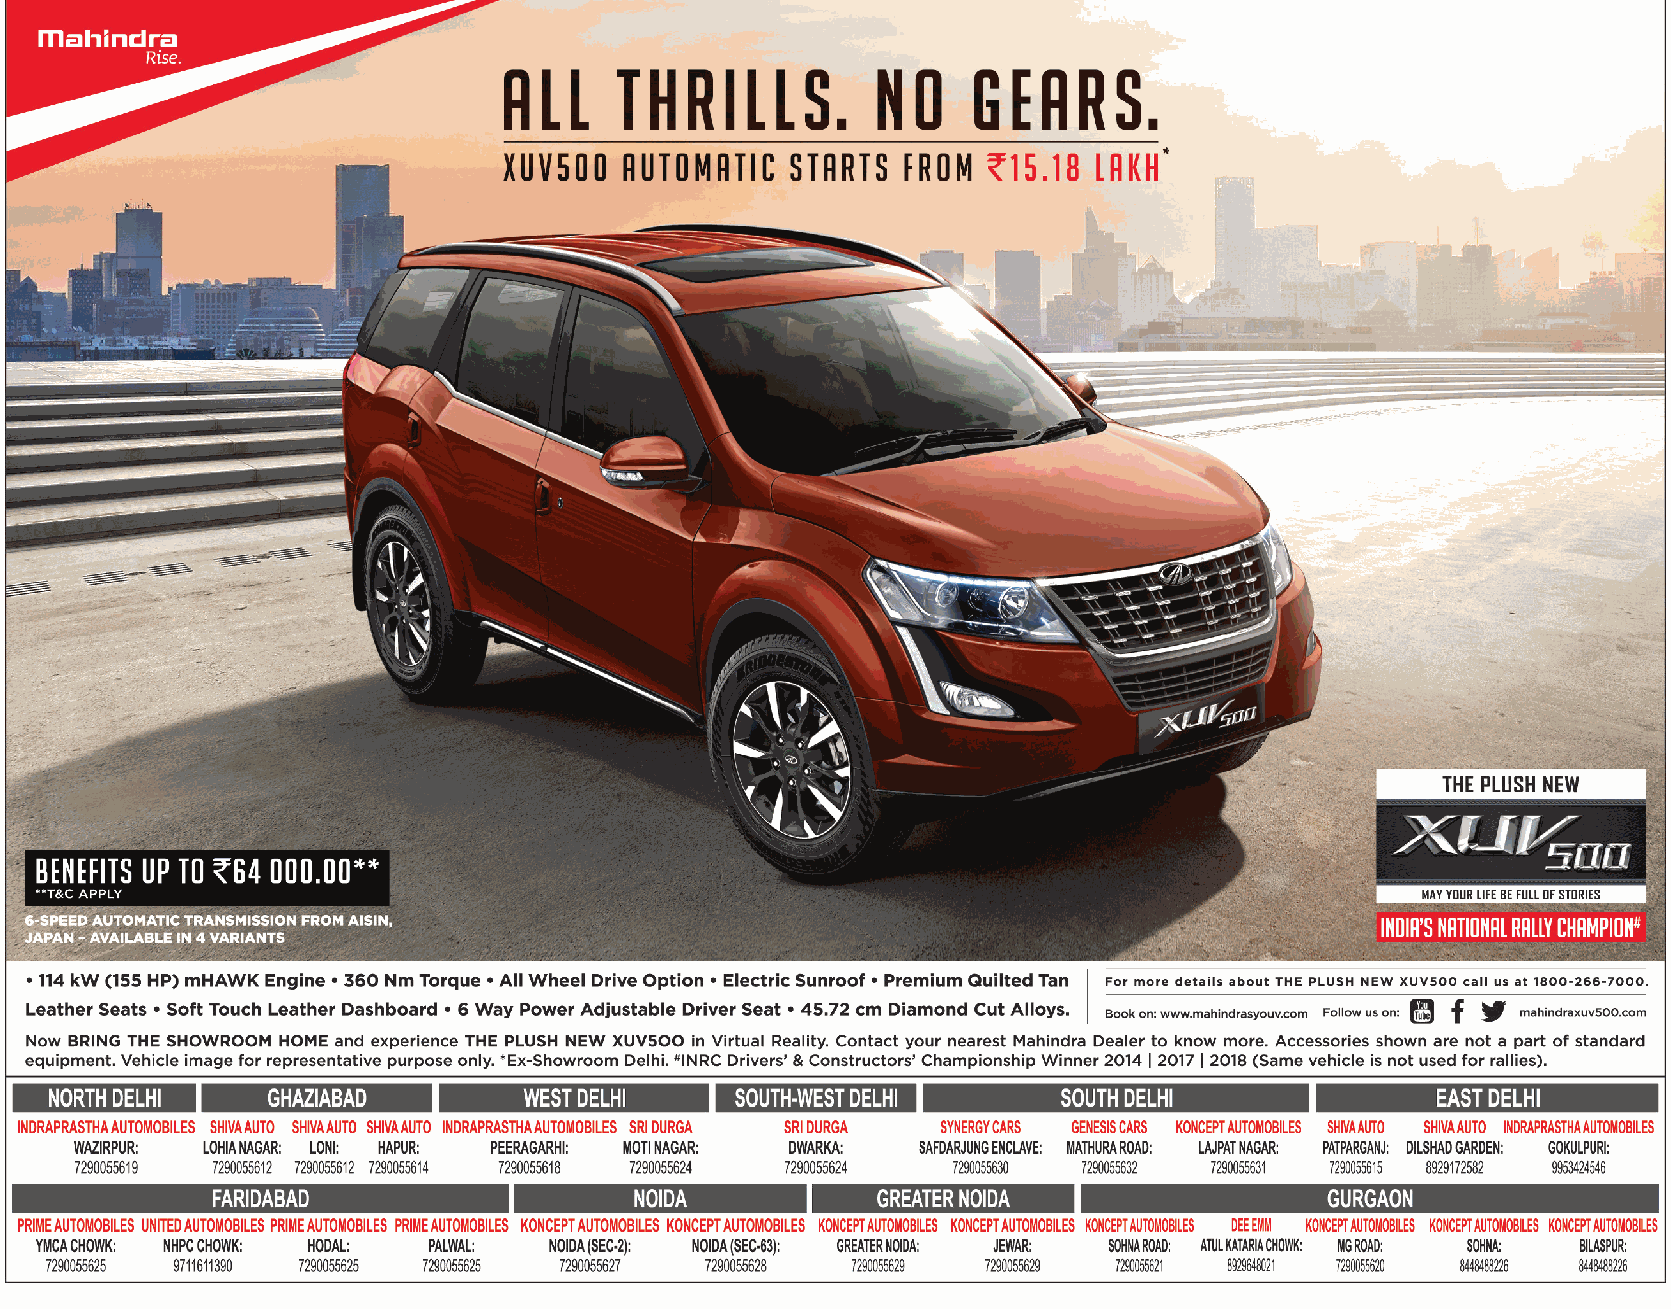 Mahindra Xuv 500 Car Benefits Upto Rs 64000 Ad - Compact Sport Utility Vehicle , HD Wallpaper & Backgrounds